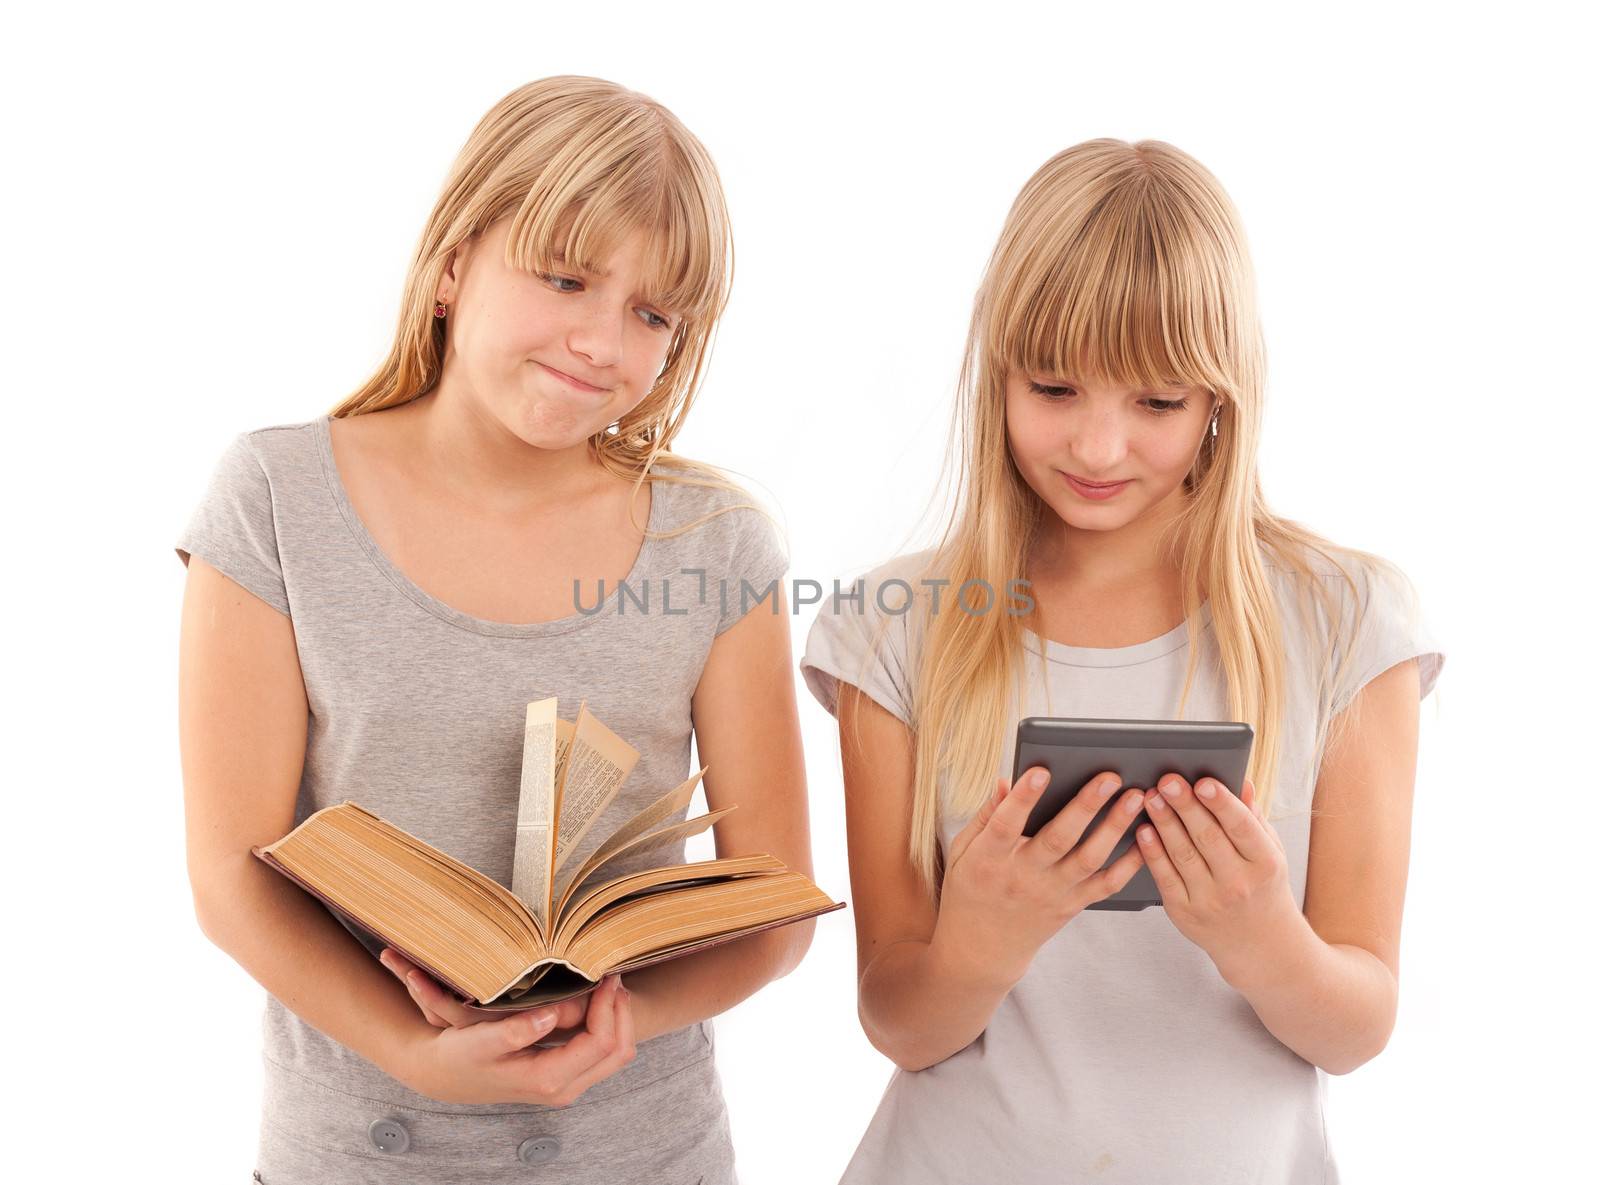 Ebook vs book - Girl holding a big book and her girlfriend reading an ebook reader tablet device.